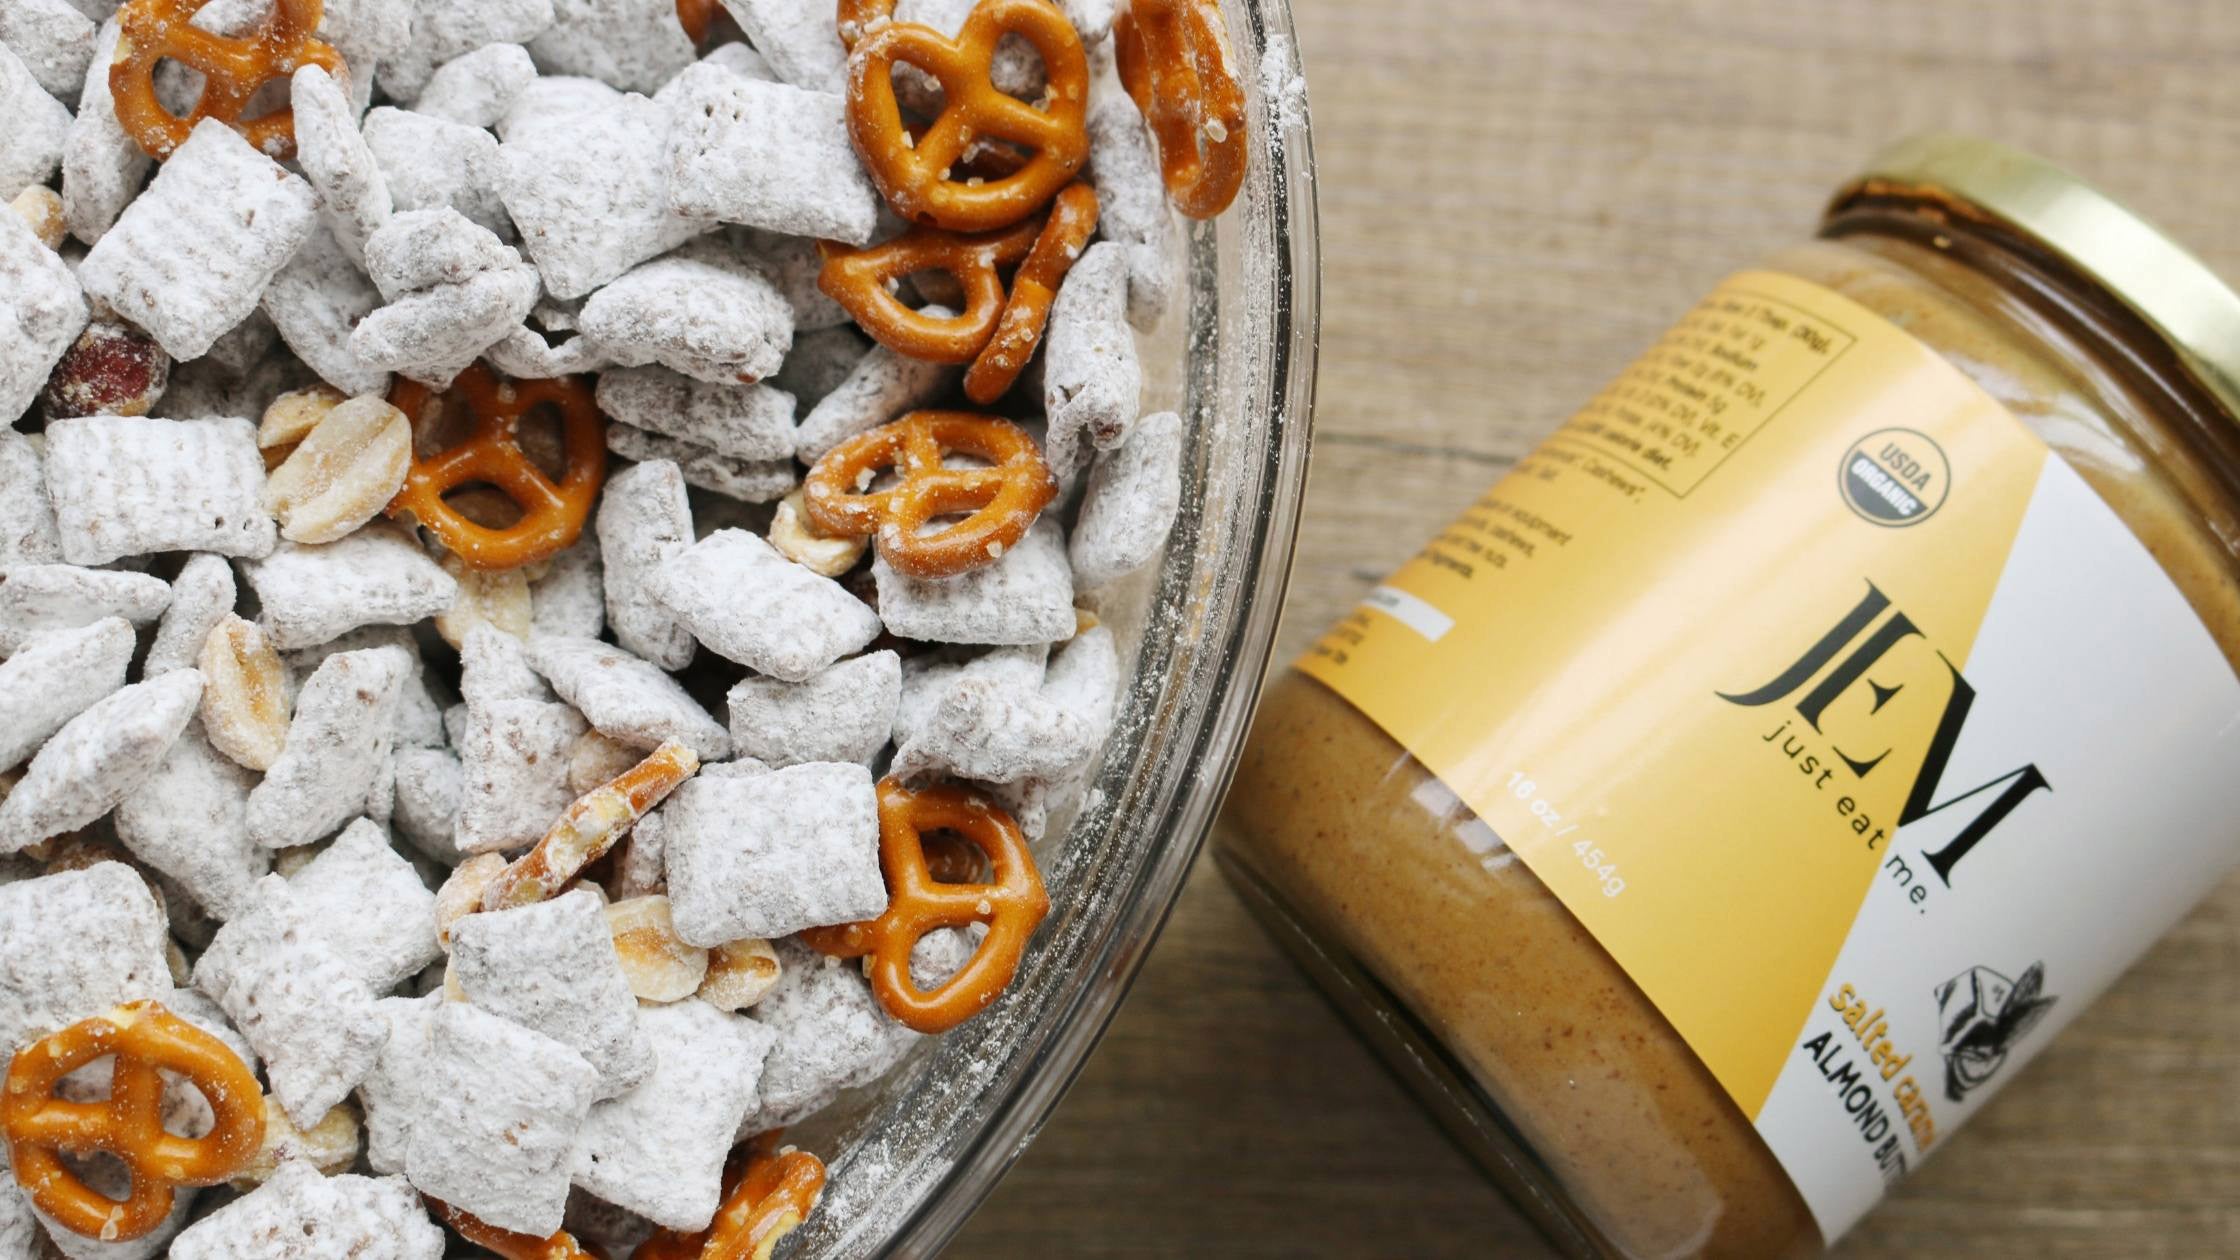 chex covered in powdered sugar and pretzels in a glass bowl next to a JEM Organics nut butter jar